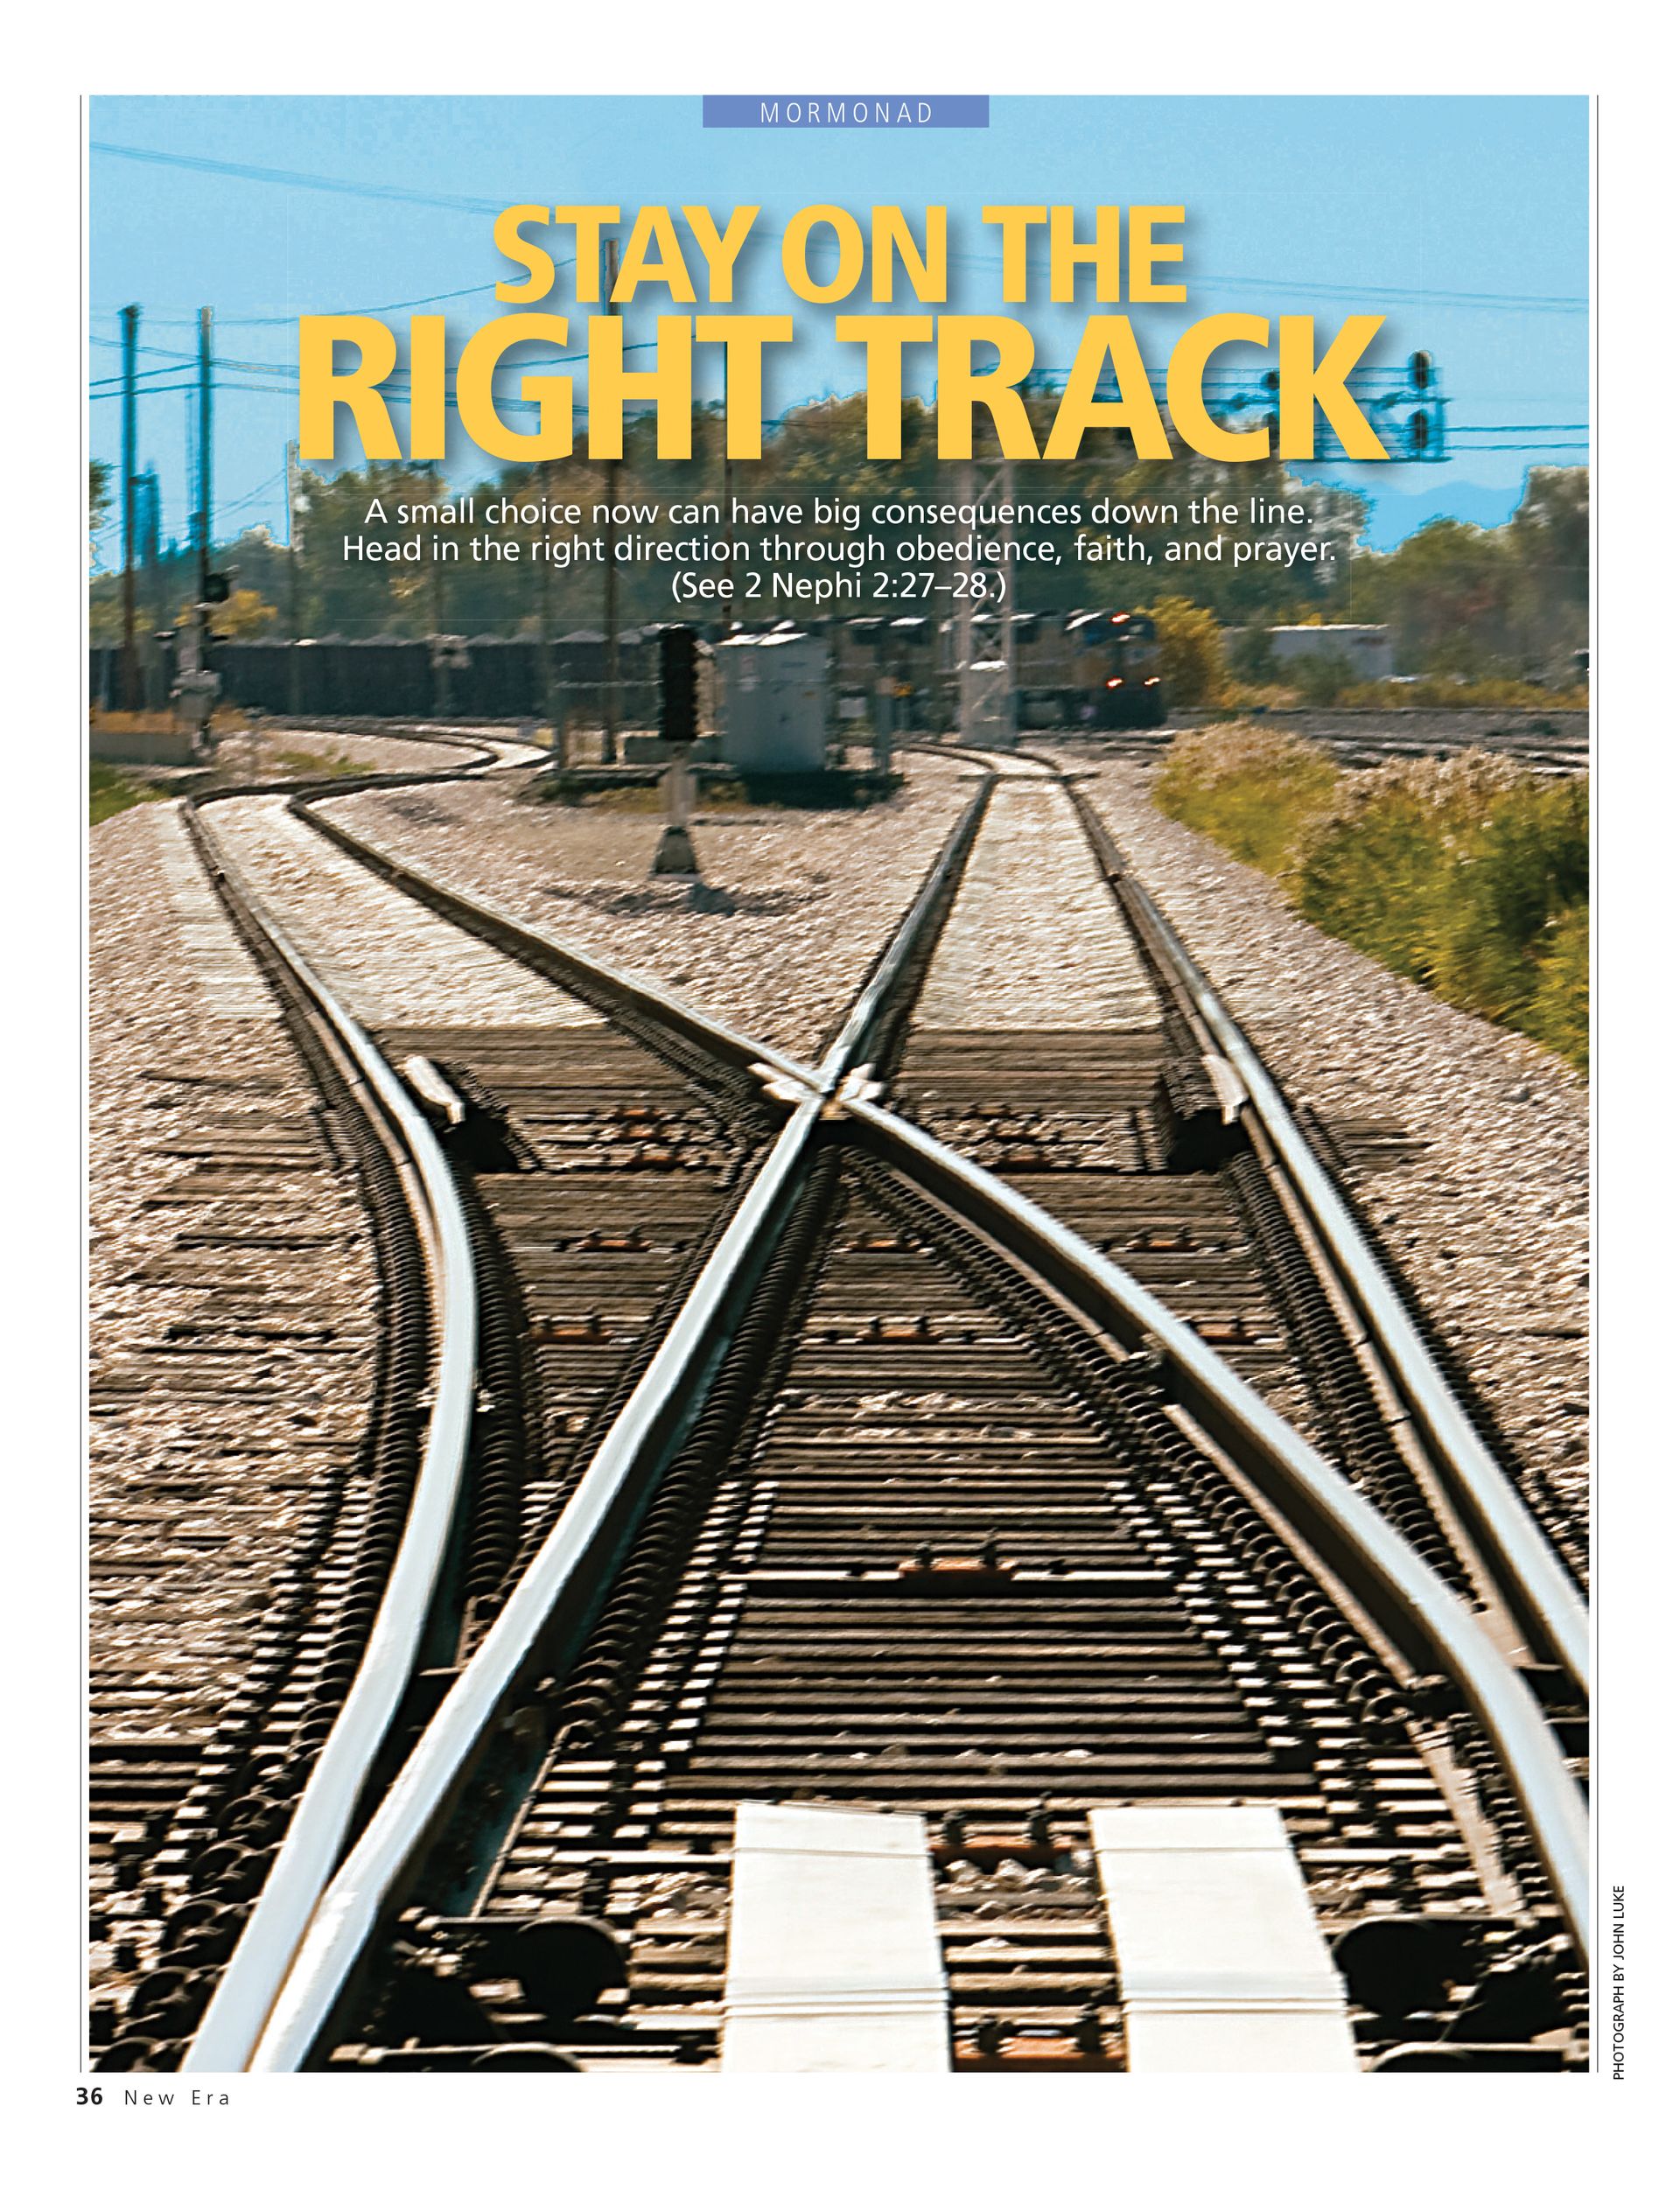 Stay on the Right Track. A small choice now can have big consequences down the line. Head in the right direction through obedience, faith, and prayer. (See 2 Nephi 2:27–28.) Mar. 2010 © undefined ipCode 1.